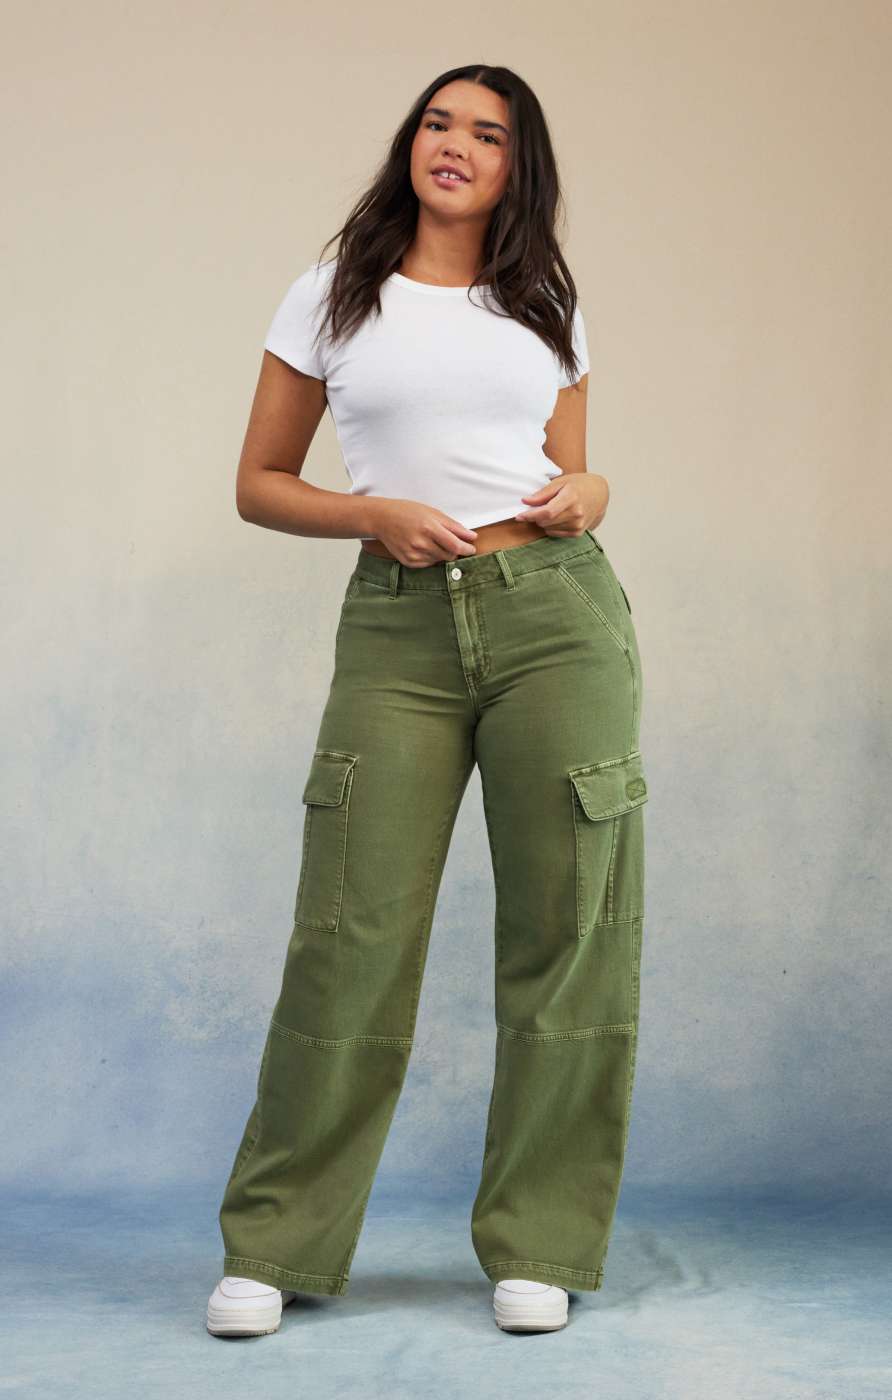 Model in olive green curvy pants